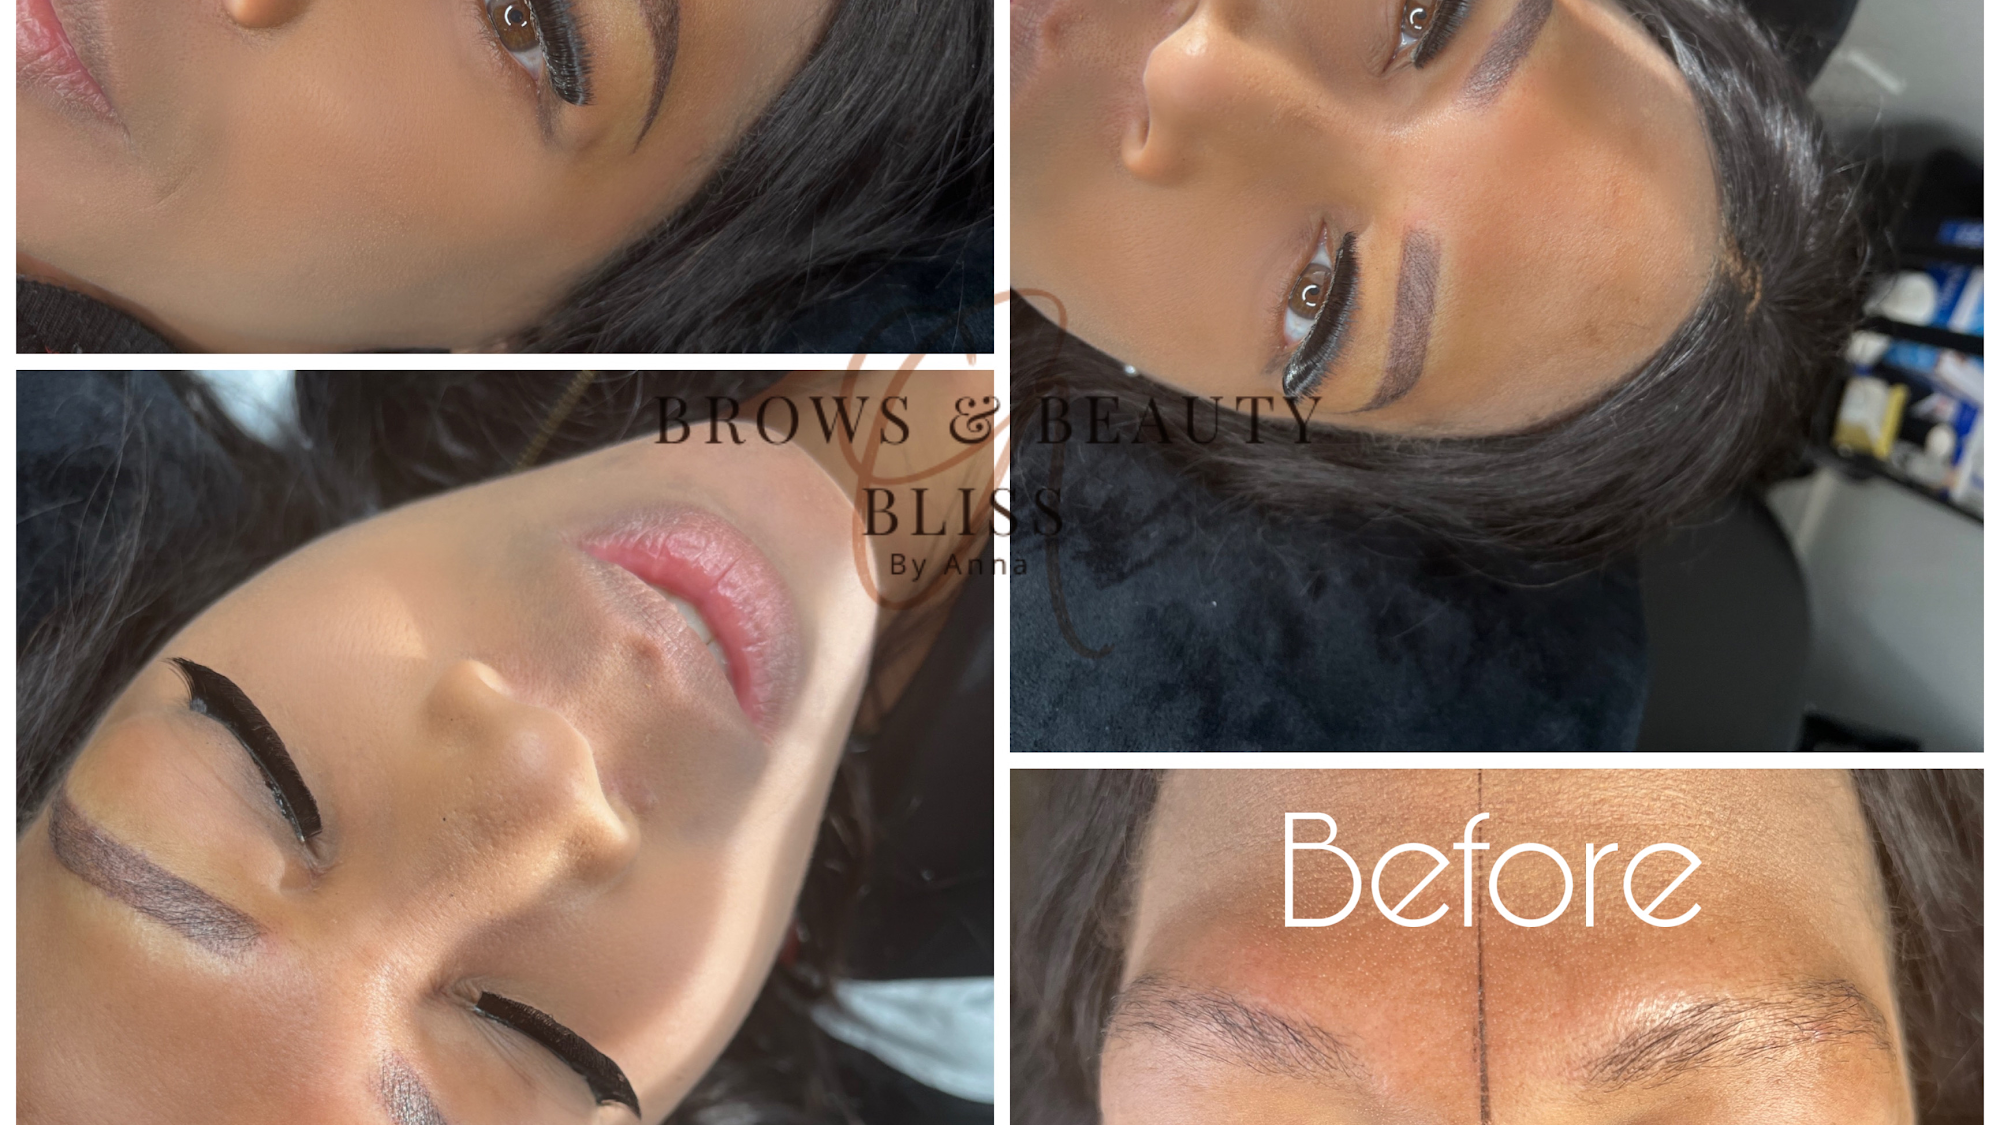 Brows & Beauty Bliss by Anna. (By appointment only) 1320 5th St Suite B, Seabrook Texas 77586